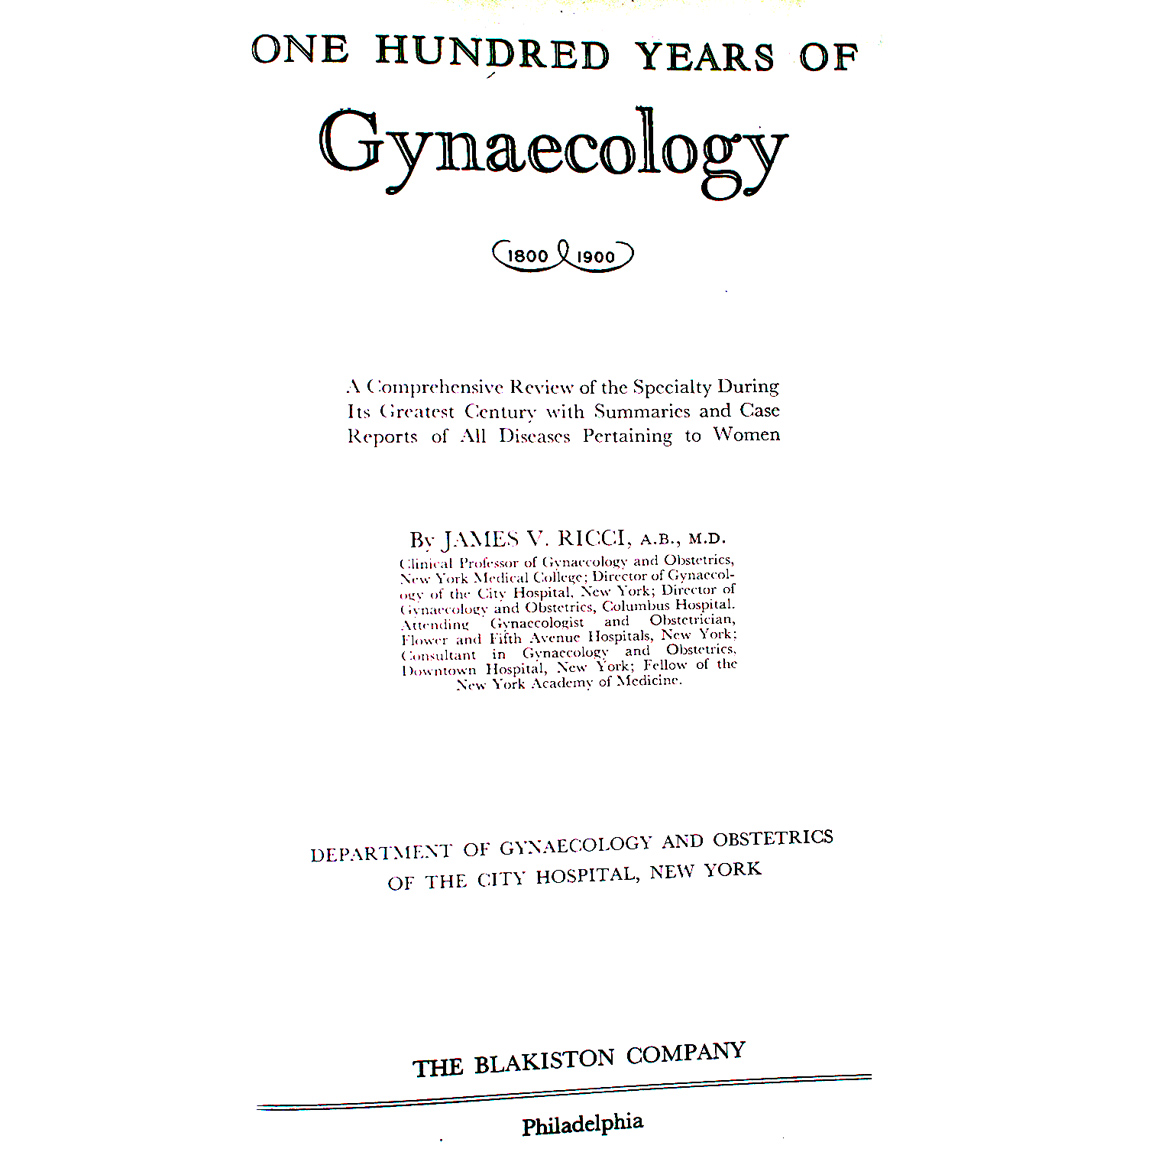 1945-RICCI-One Hundred Years of Gynecology-title page